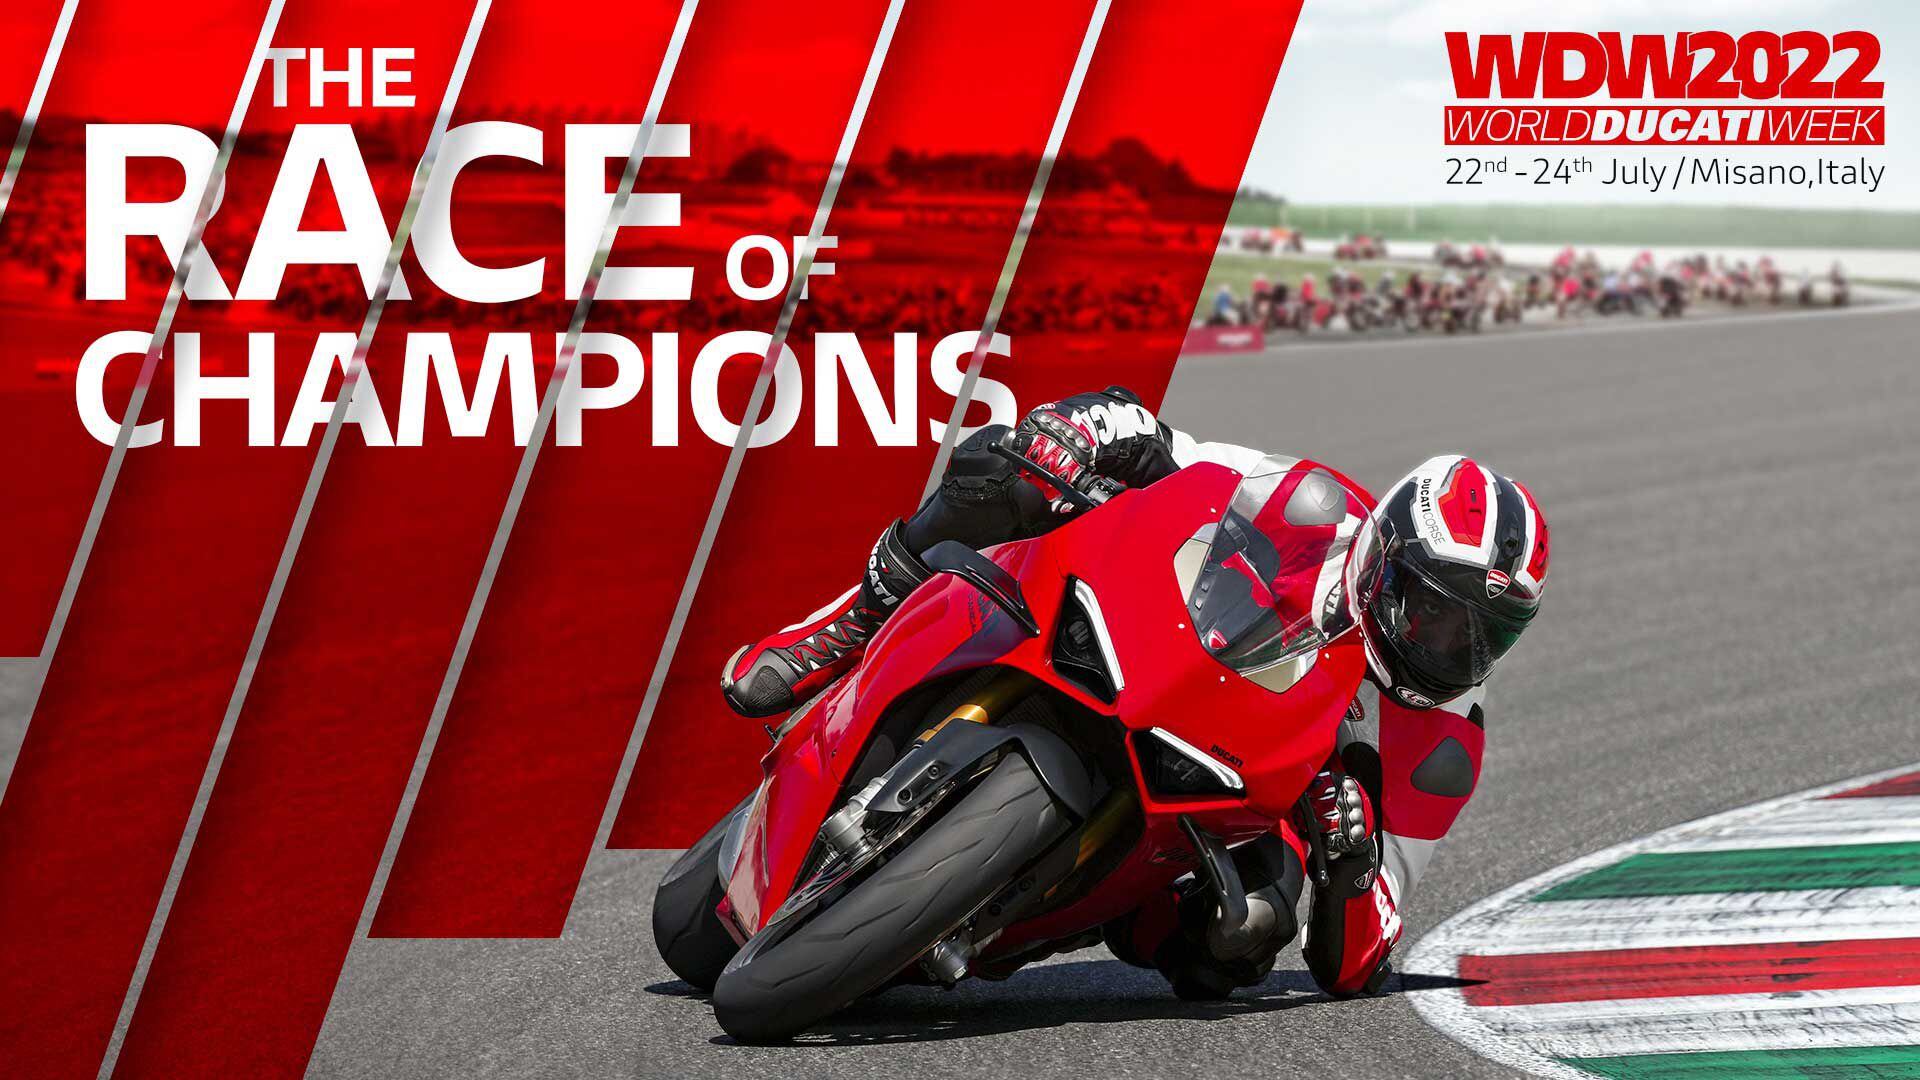 WDW2022 is set, and so is the 21-rider lineup for the Race of Champions, which includes MotoGP’s Pecco Bagnaia and MotoAmerica’s Danilo Petrucci.